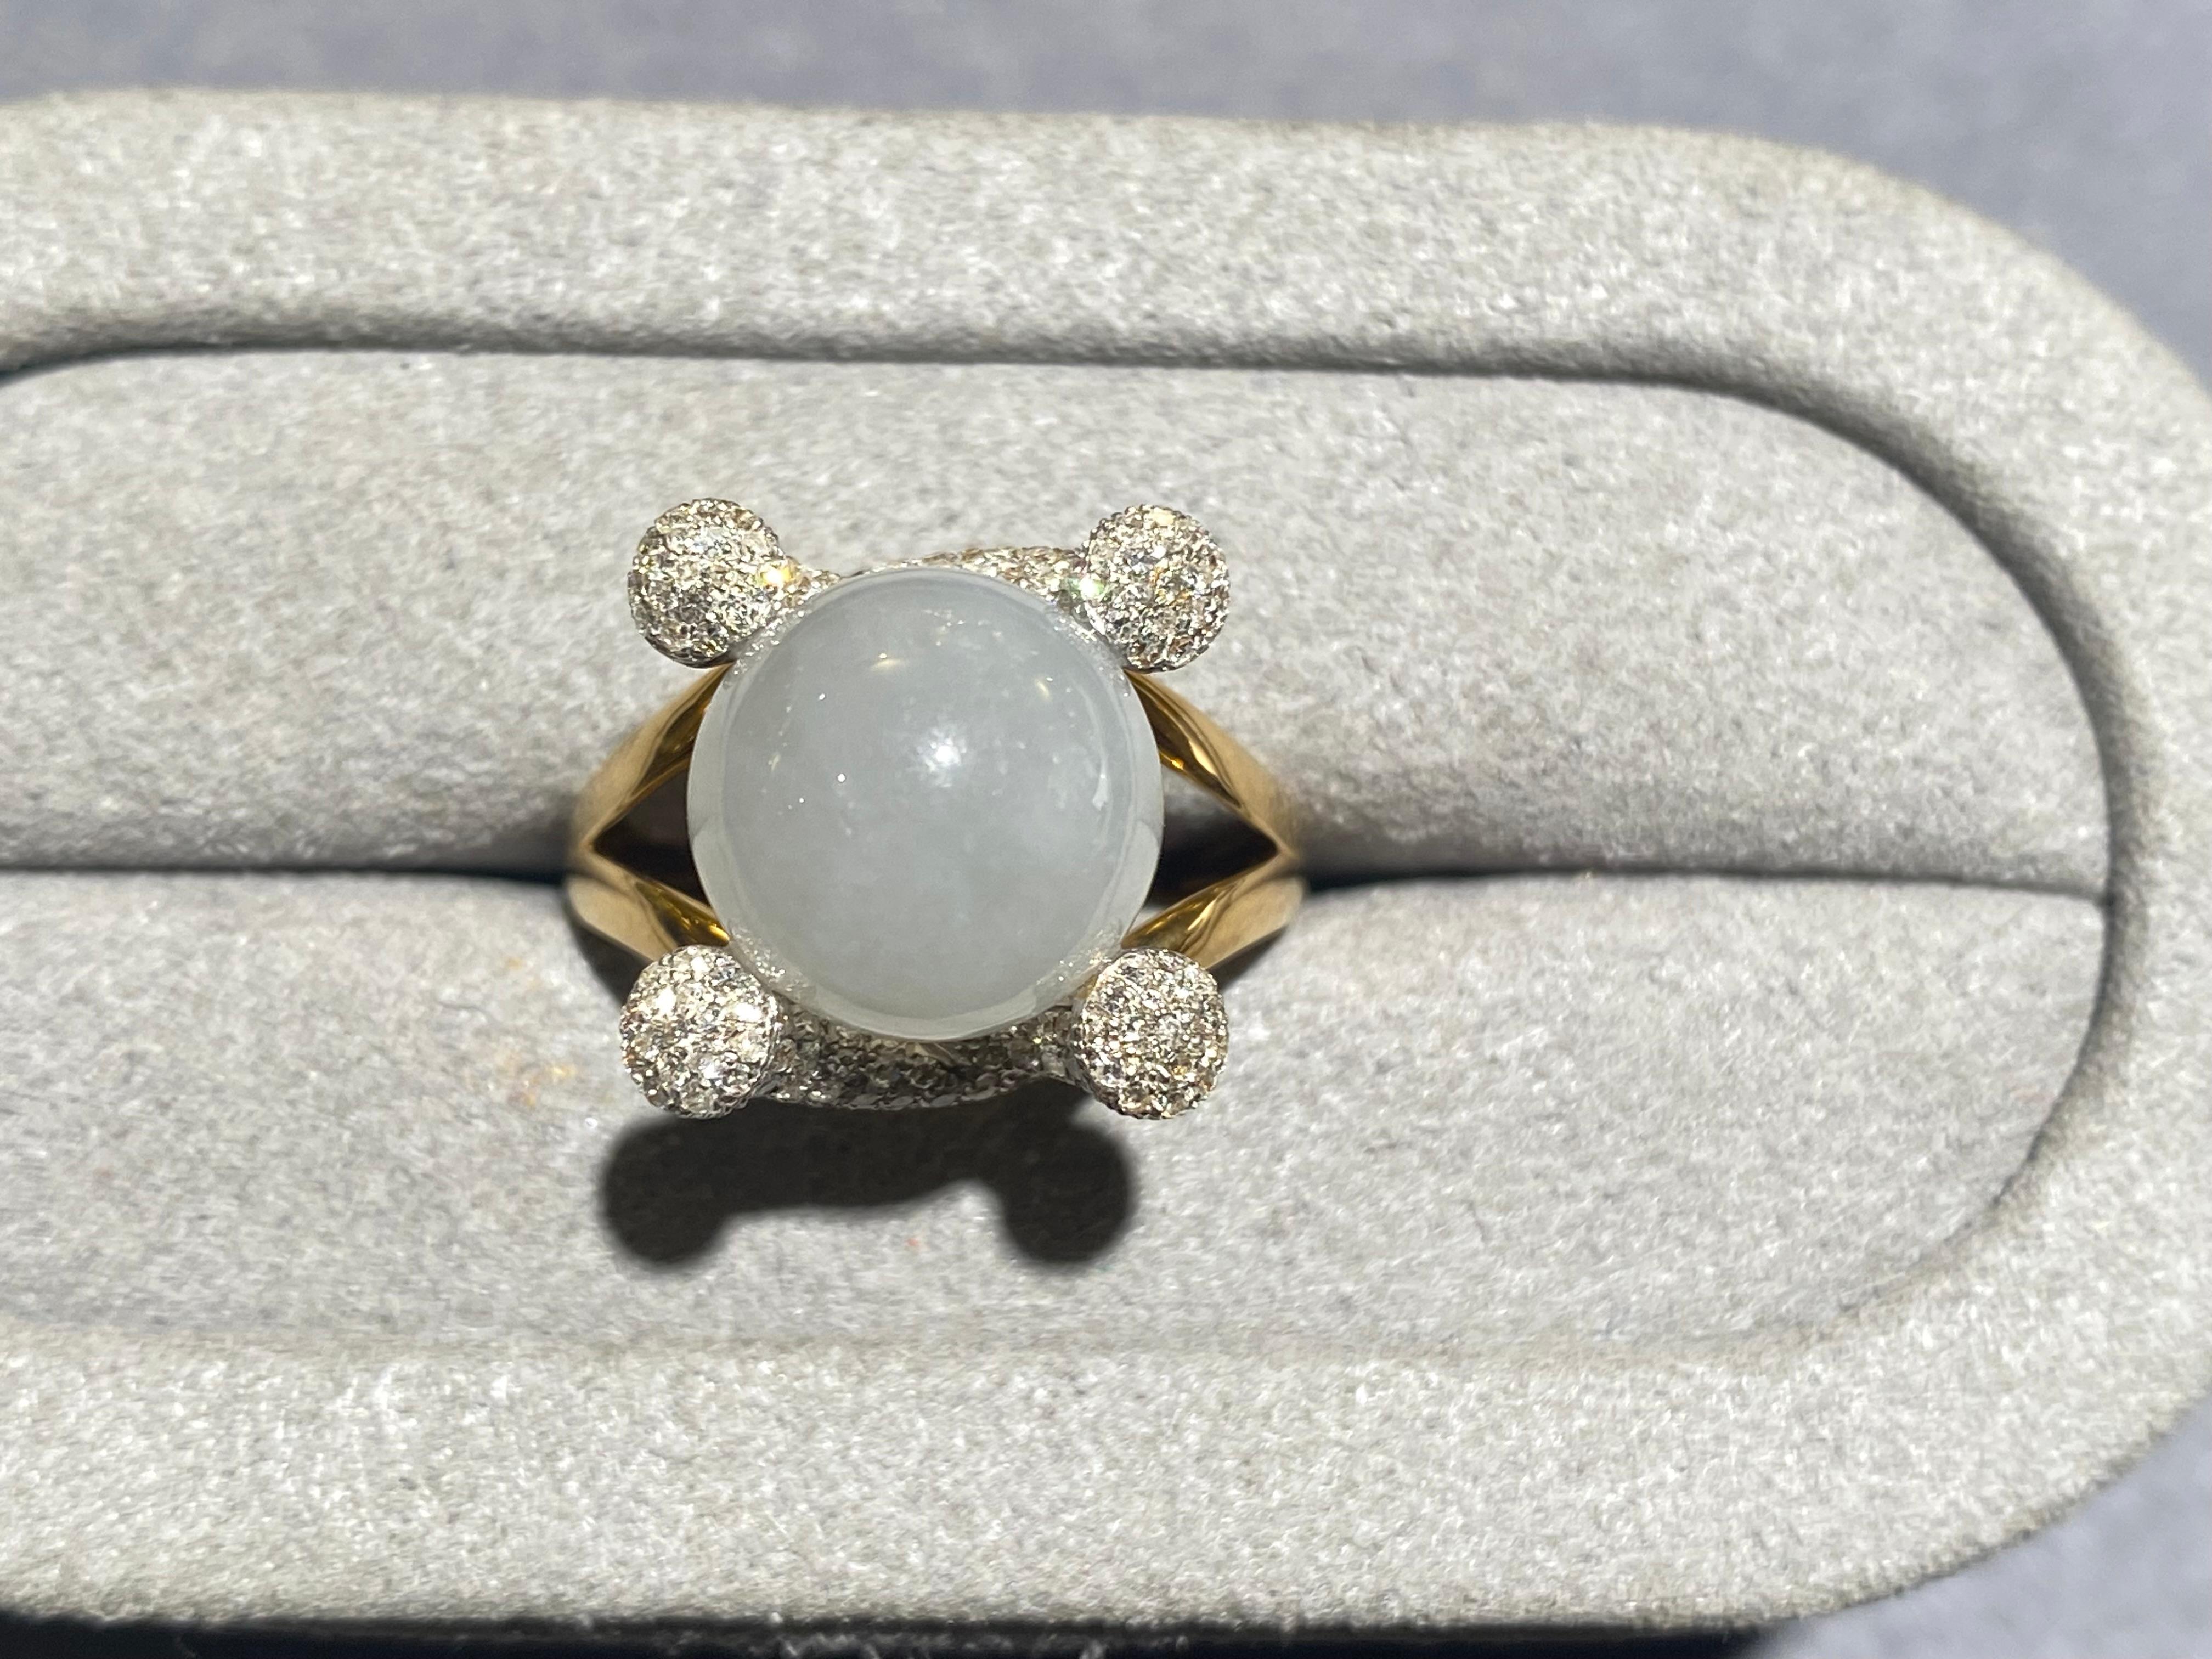 A light lavender colour type A jadeite and diamond ring in 18k yellow gold. The jadeite is in the bead form and is set between 2 diamond encrusted horn-like structure. This is a very unique and fashionable design but is also suited for everyday